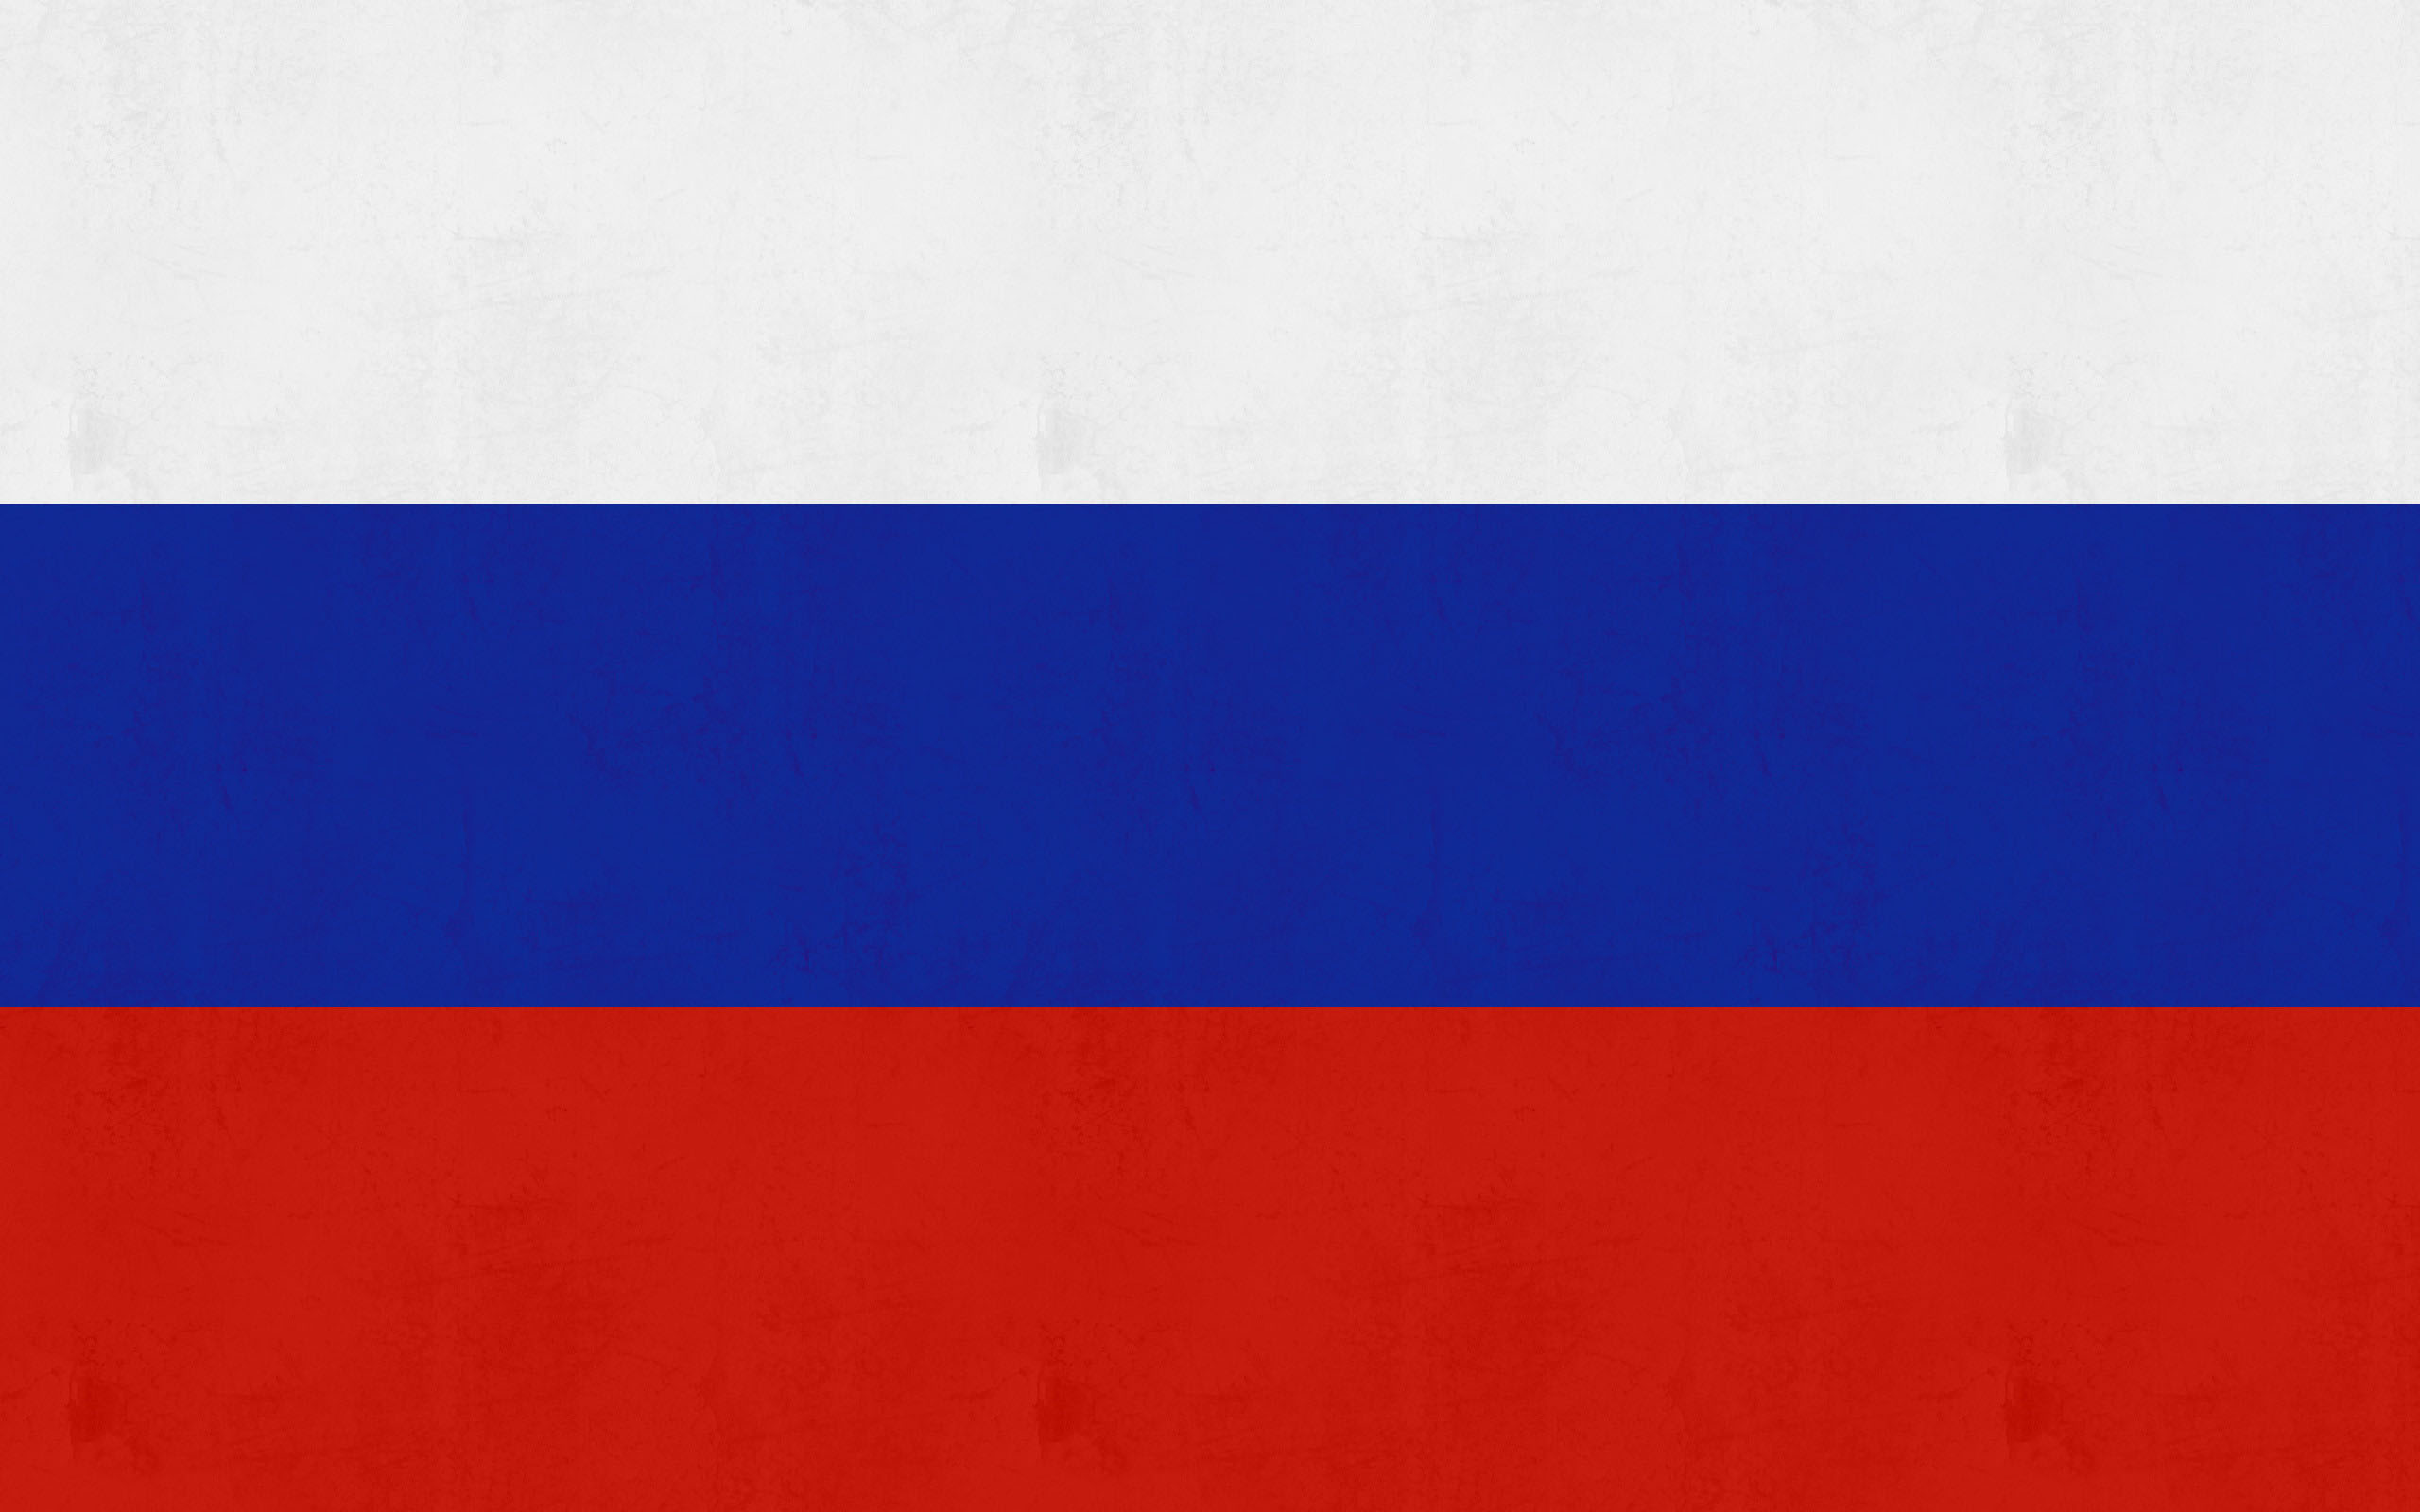 Big Russian Flag Wallpaper For Desktop Daily Background In HD